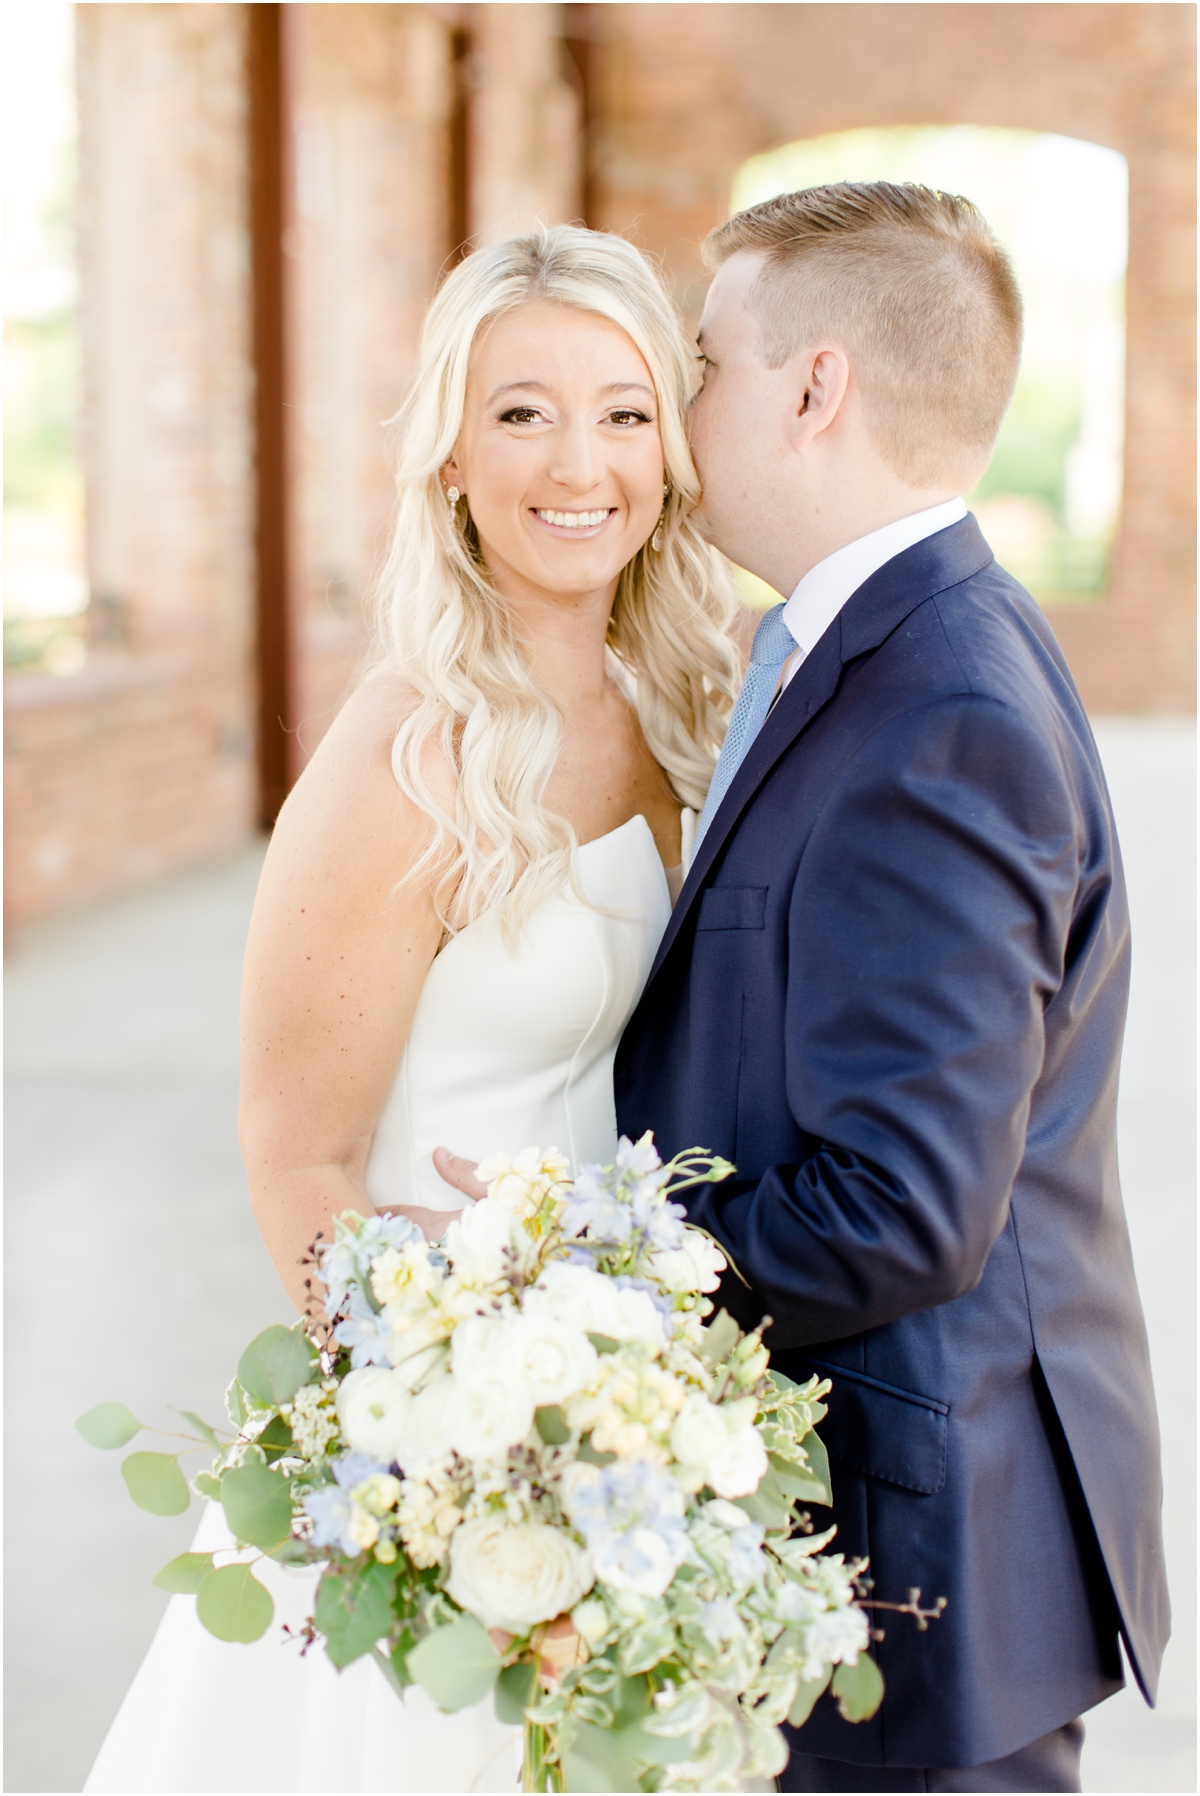 Up on the Roof Wedding in Downtown Greenville | Greenville Wedding Photographer